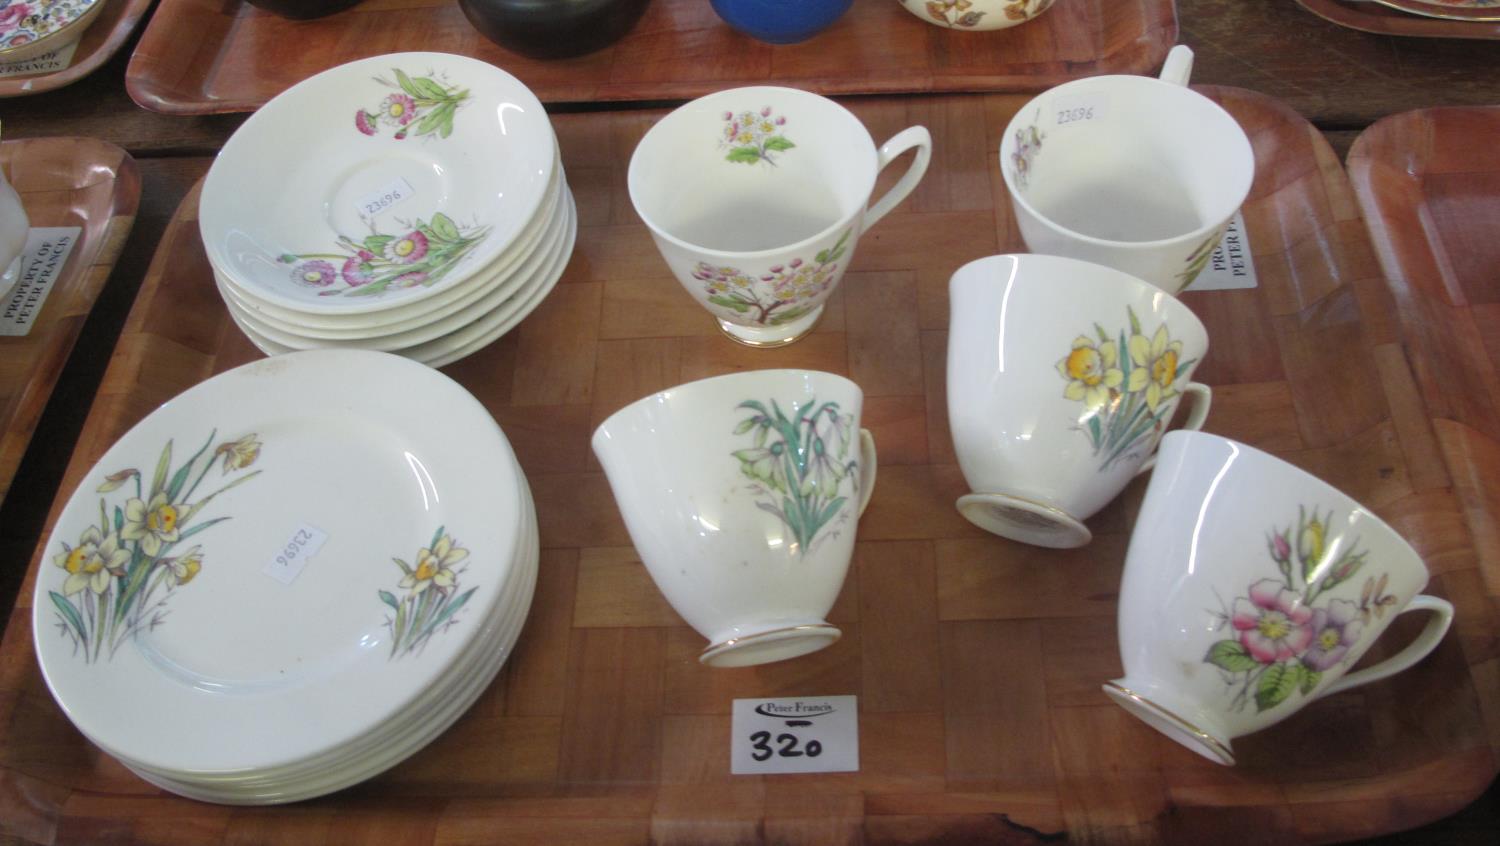 17 piece Royal Albert bone china 'Flowers of the Month' teacups and saucers with matching side